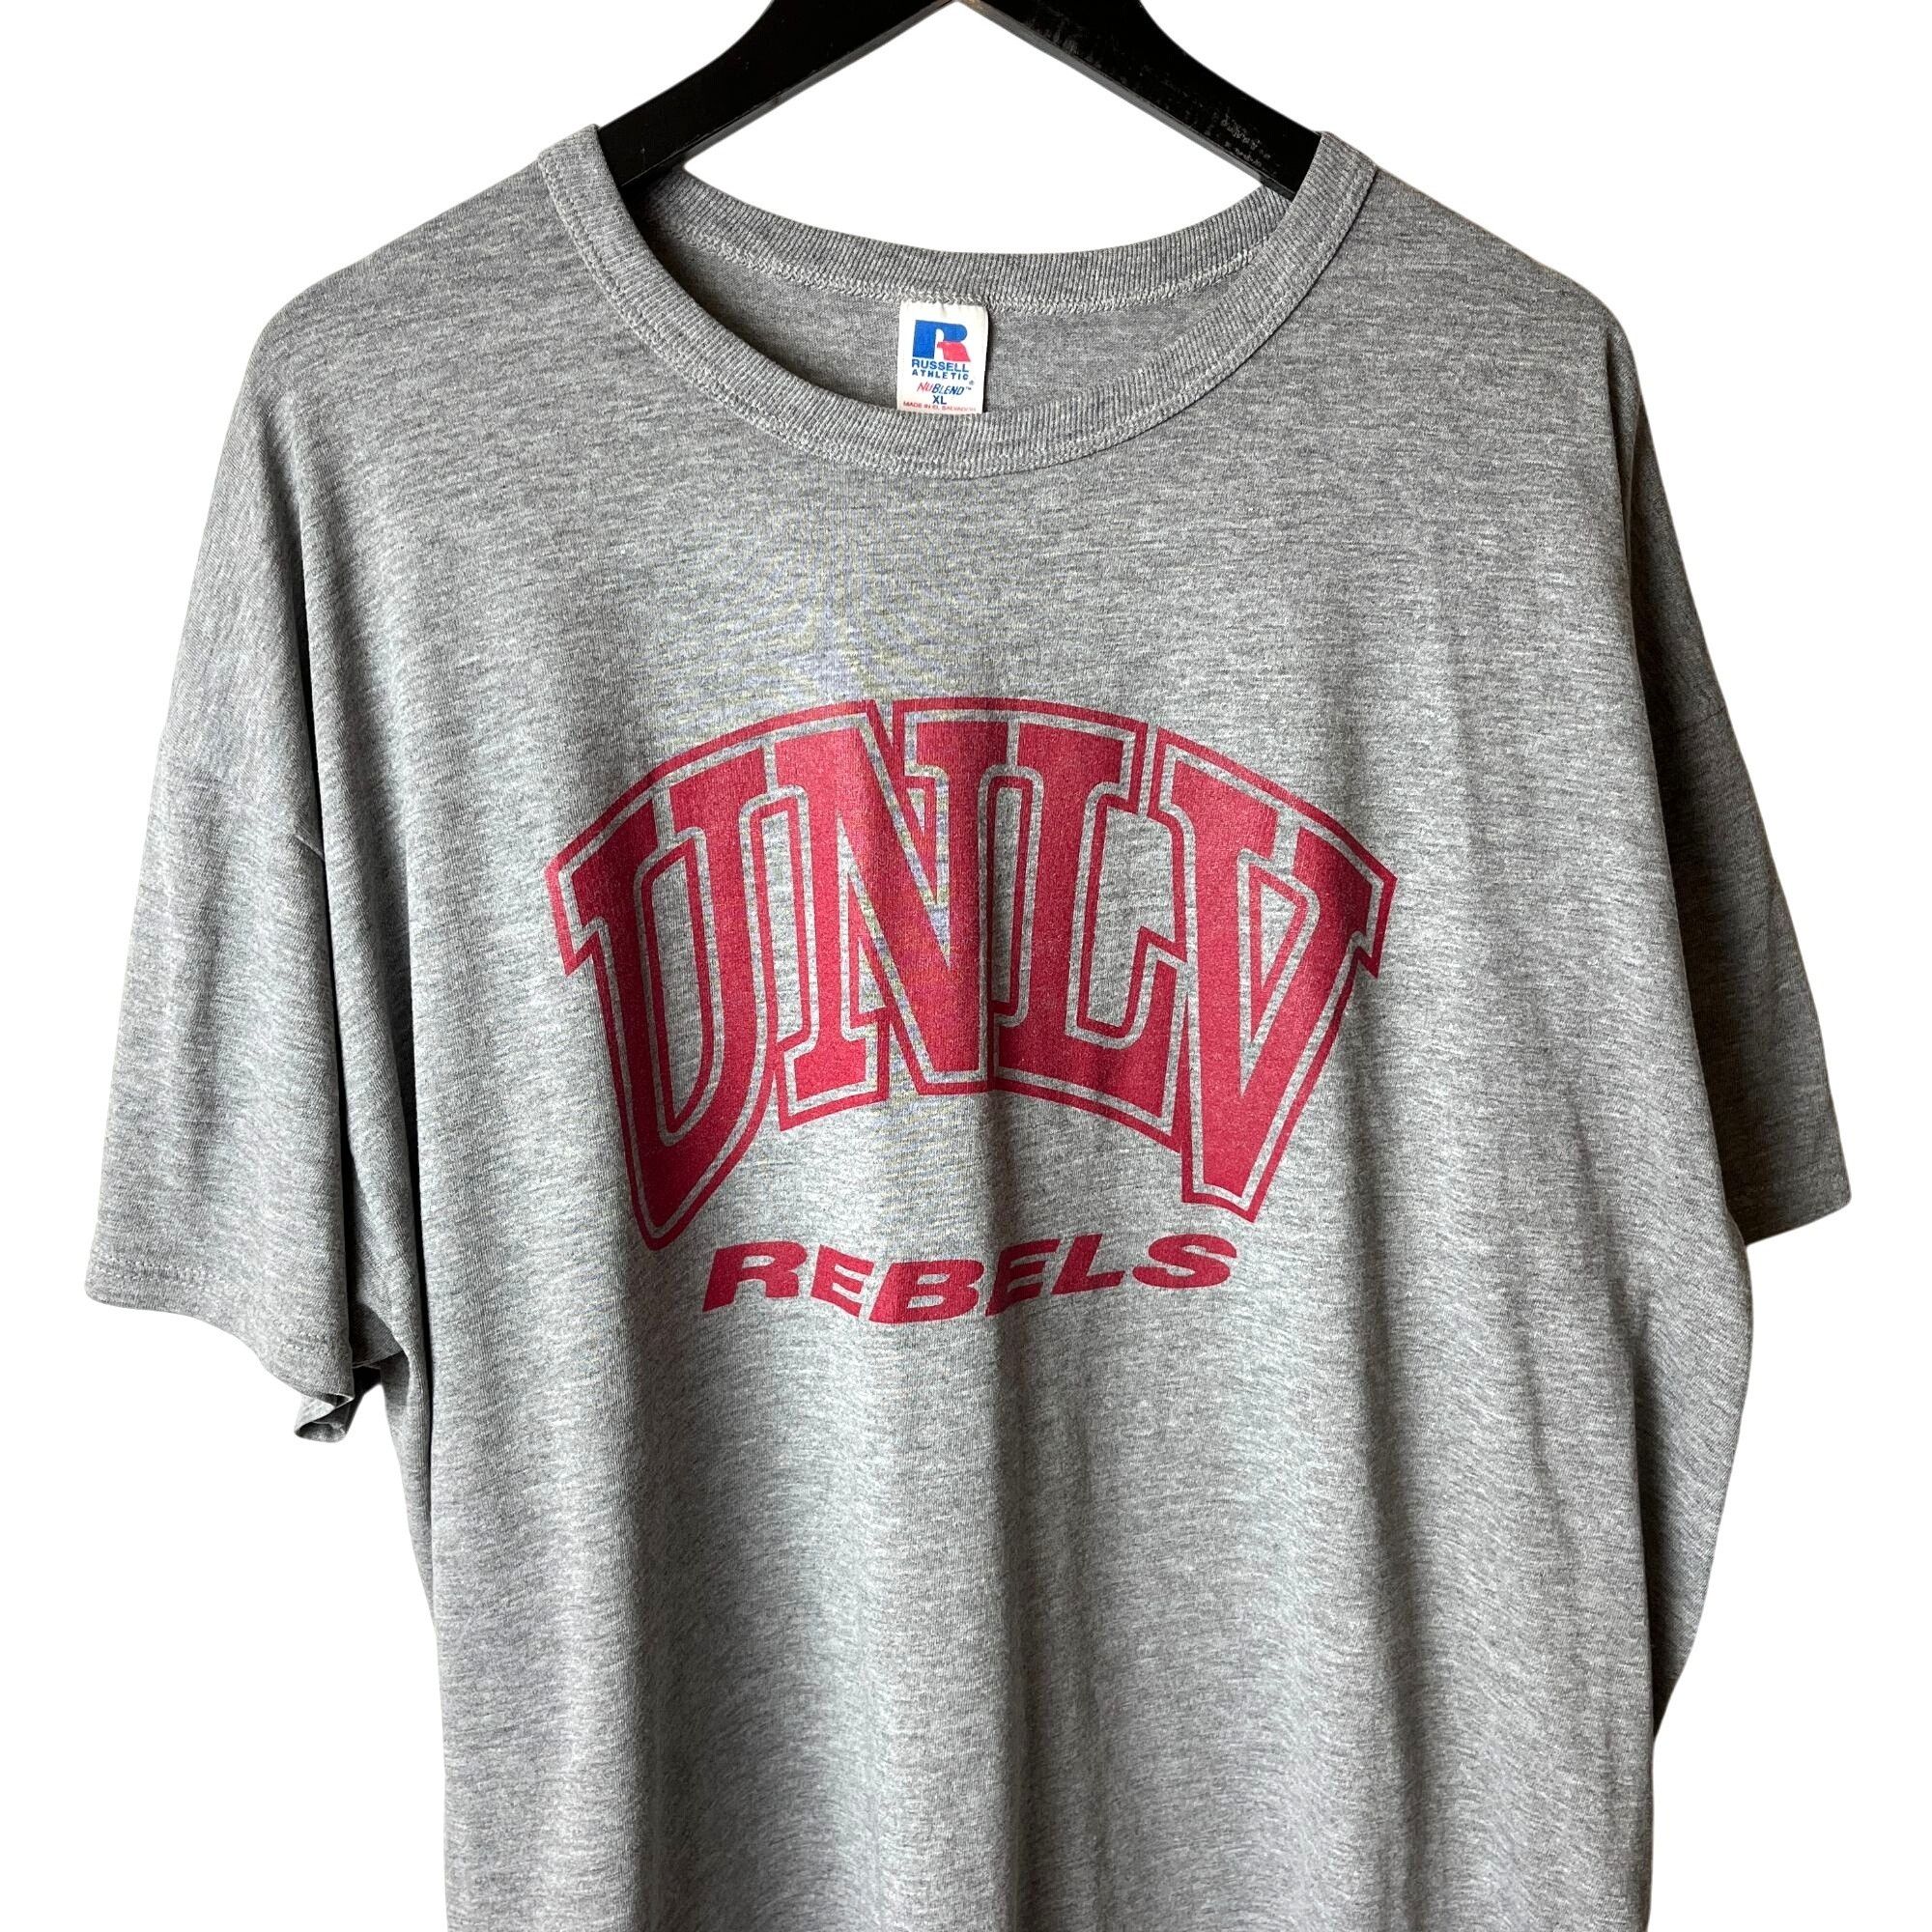 Urban Outfitters UNLV Rebels T Shirt Adult Gray XL Extra Large ...